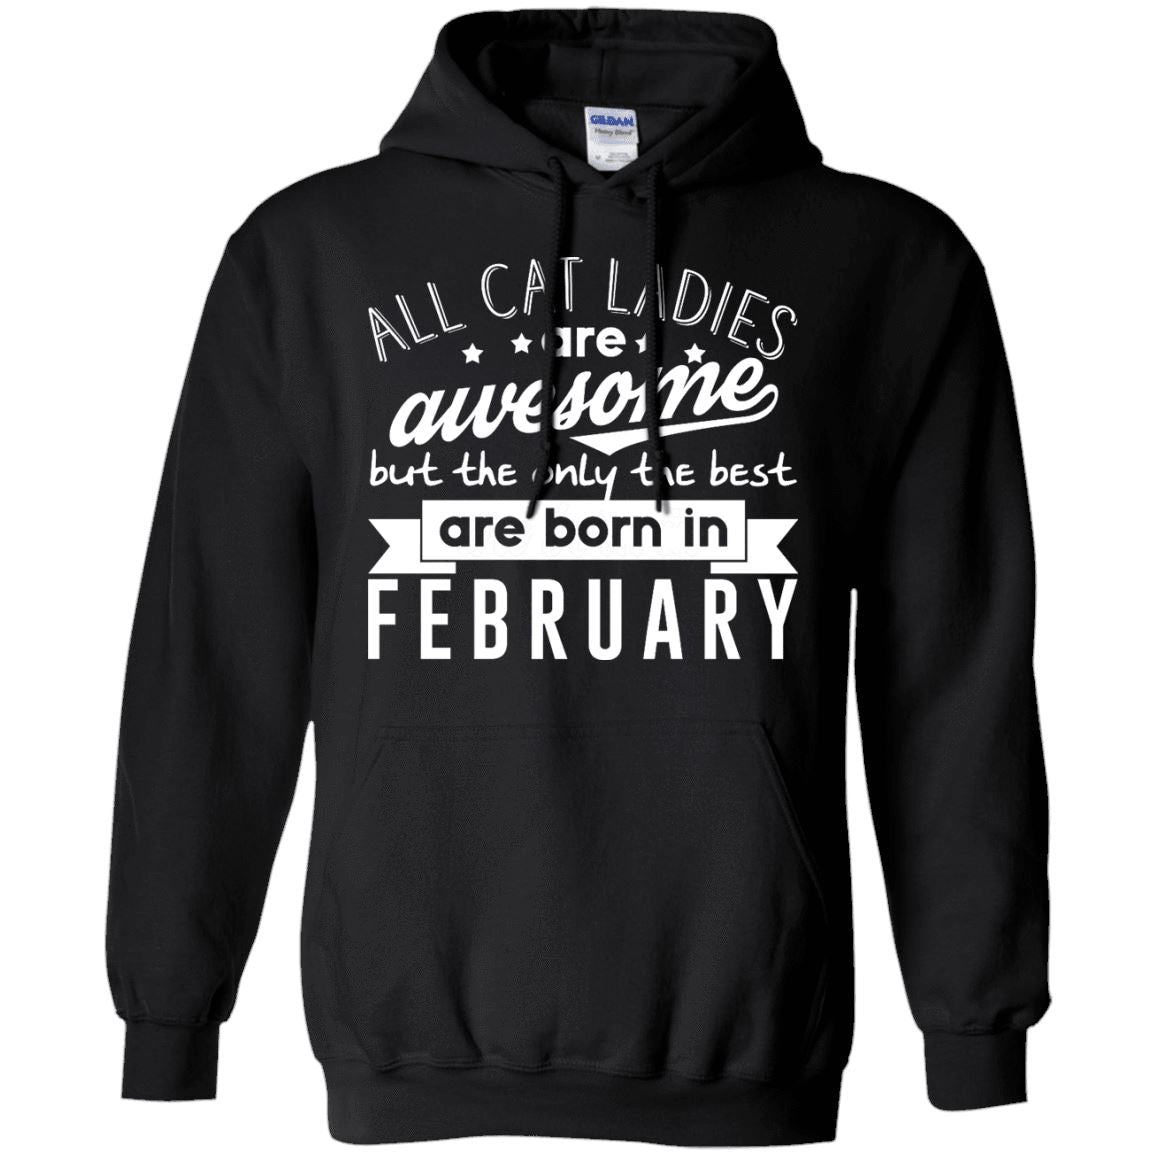 Cat Tee - All Cat Ladies Are Awesome - February - CatsForLife